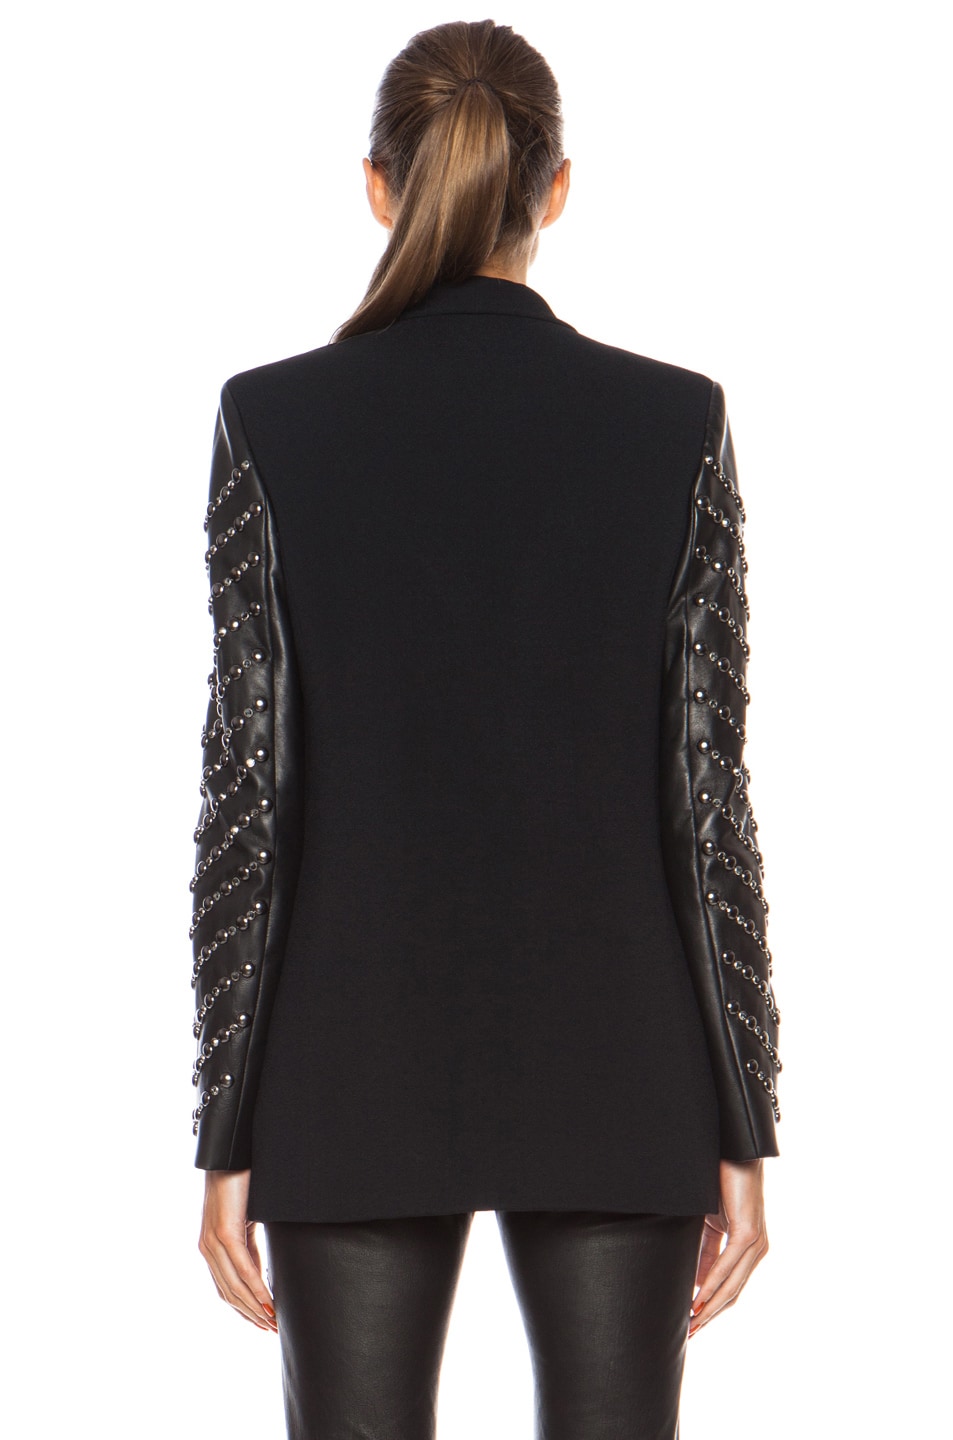 VERSACE One Button Blazer with Embellished Leather Sleeves in Black | FWRD